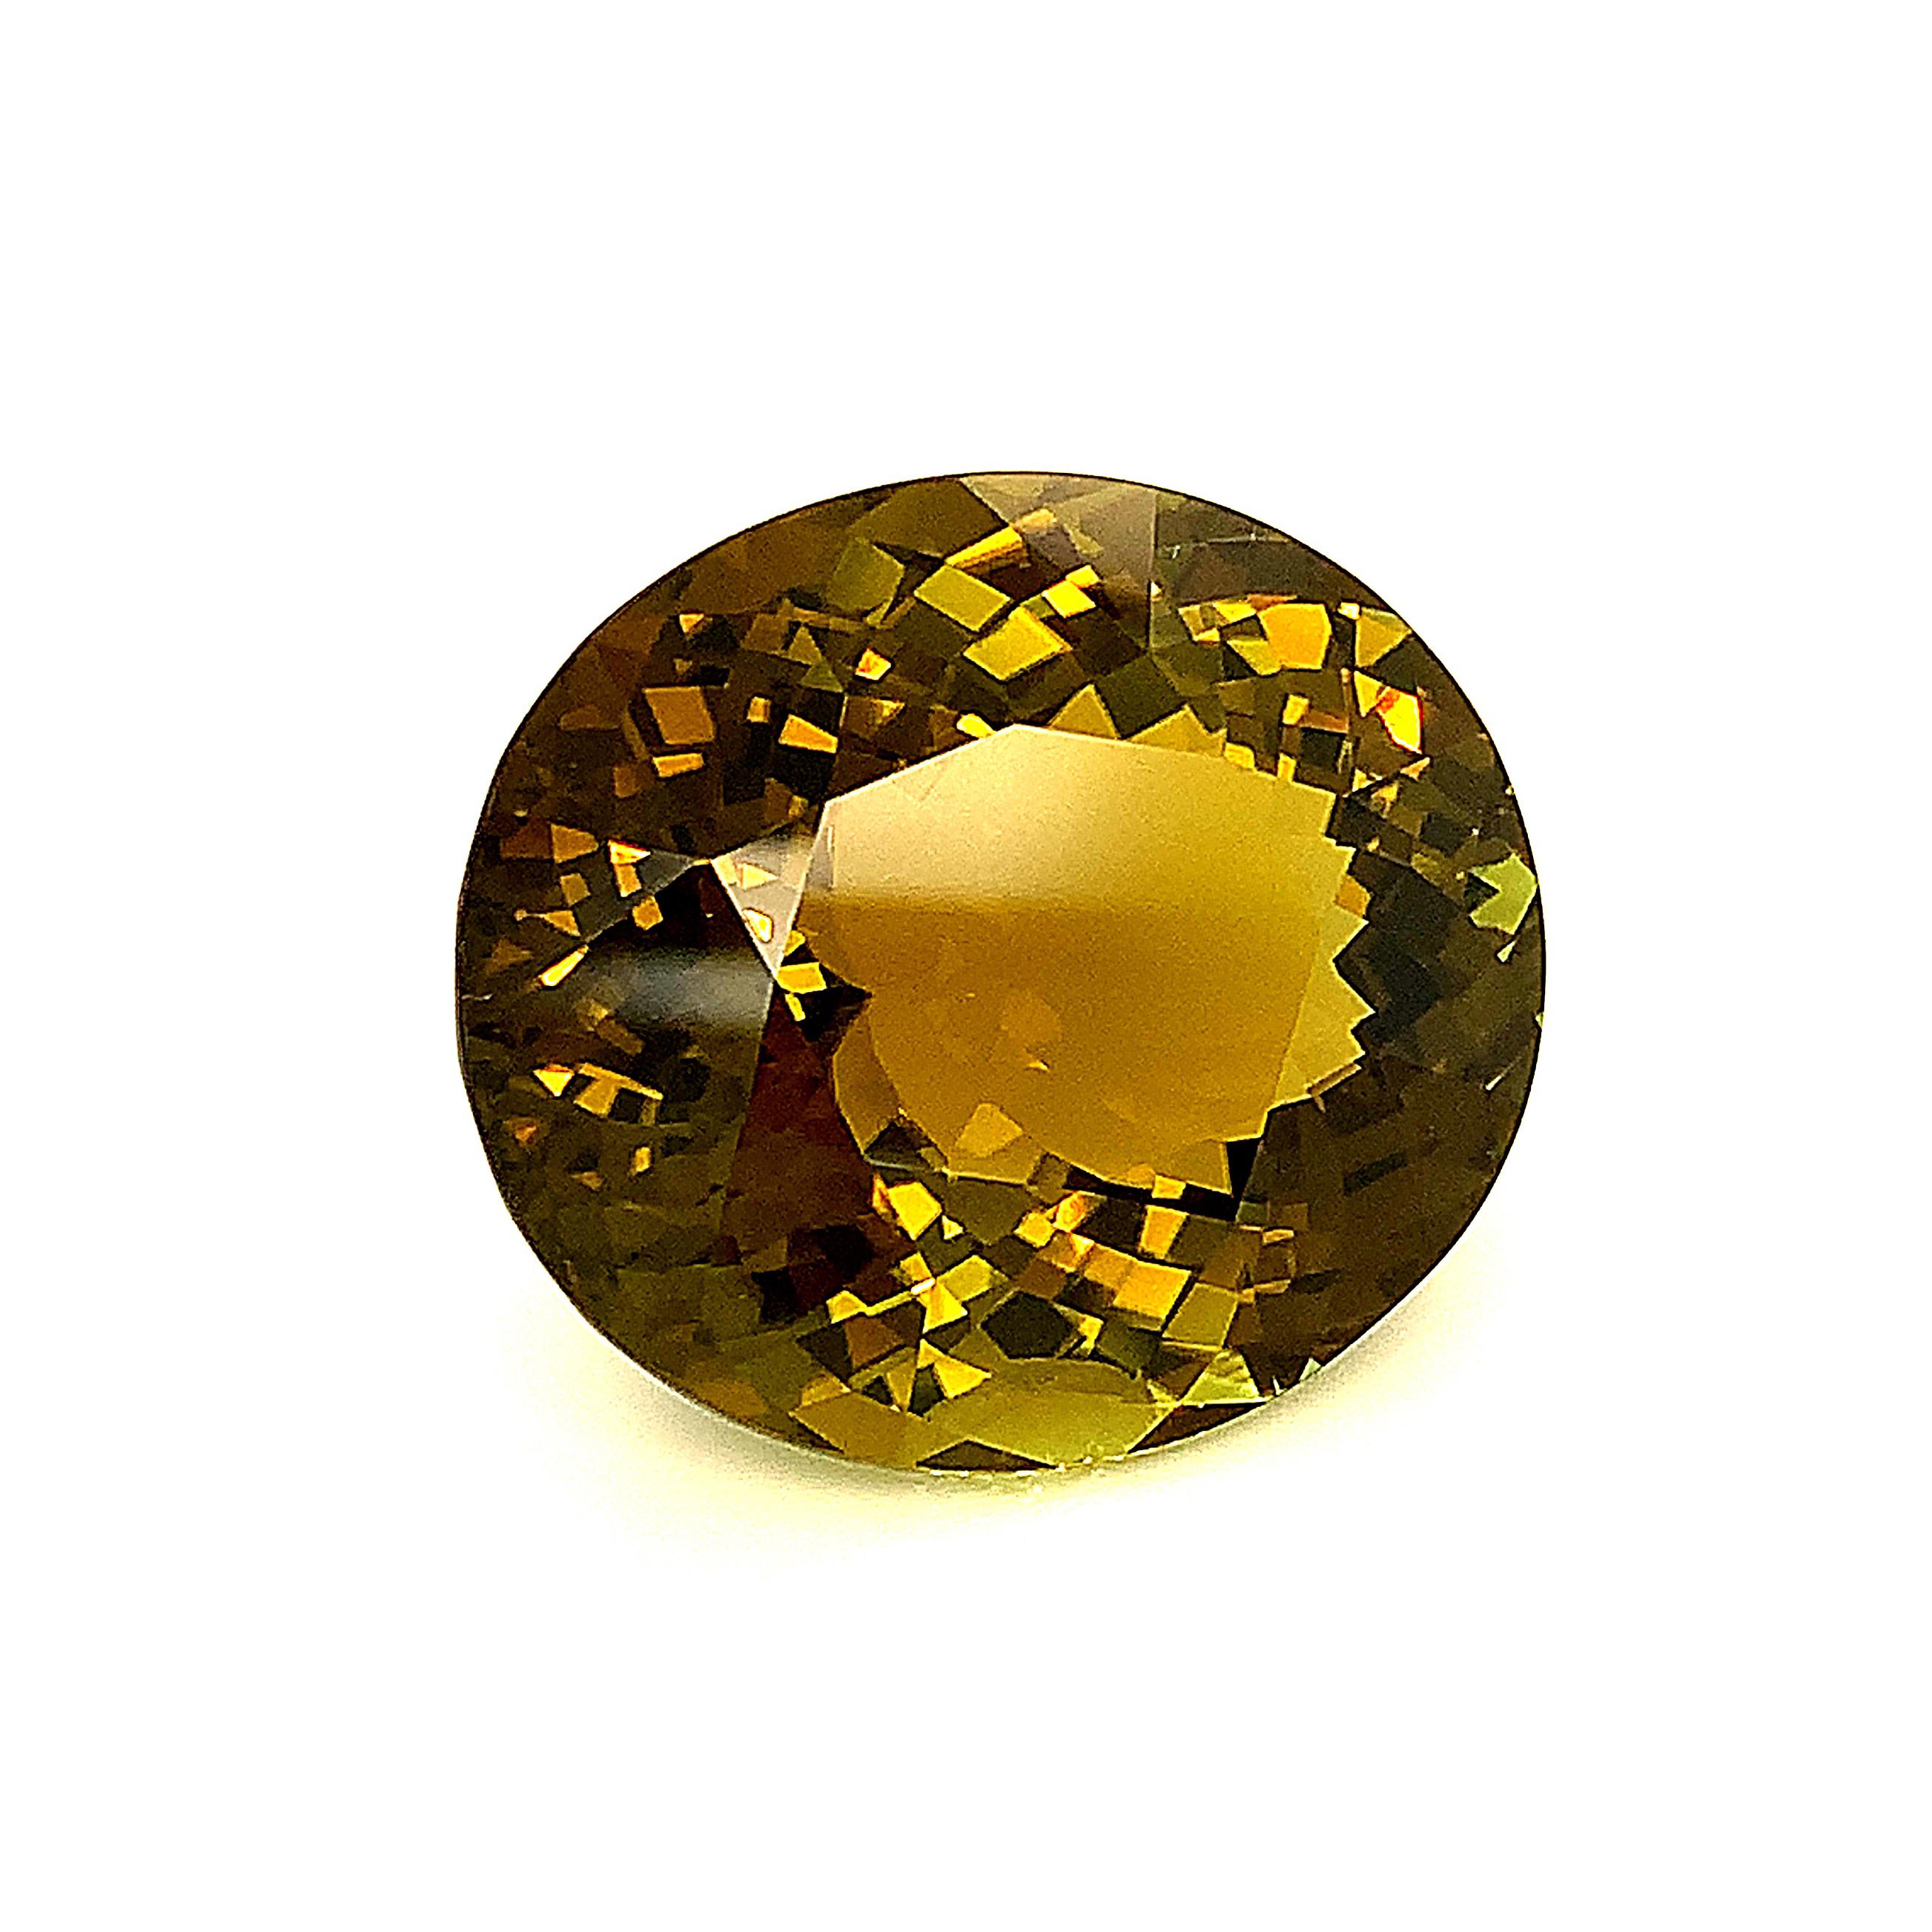 Oval Cut  79.78 Carat Golden Olive Tourmaline Oval, Loose Gemstone, GIA Certified ...A For Sale